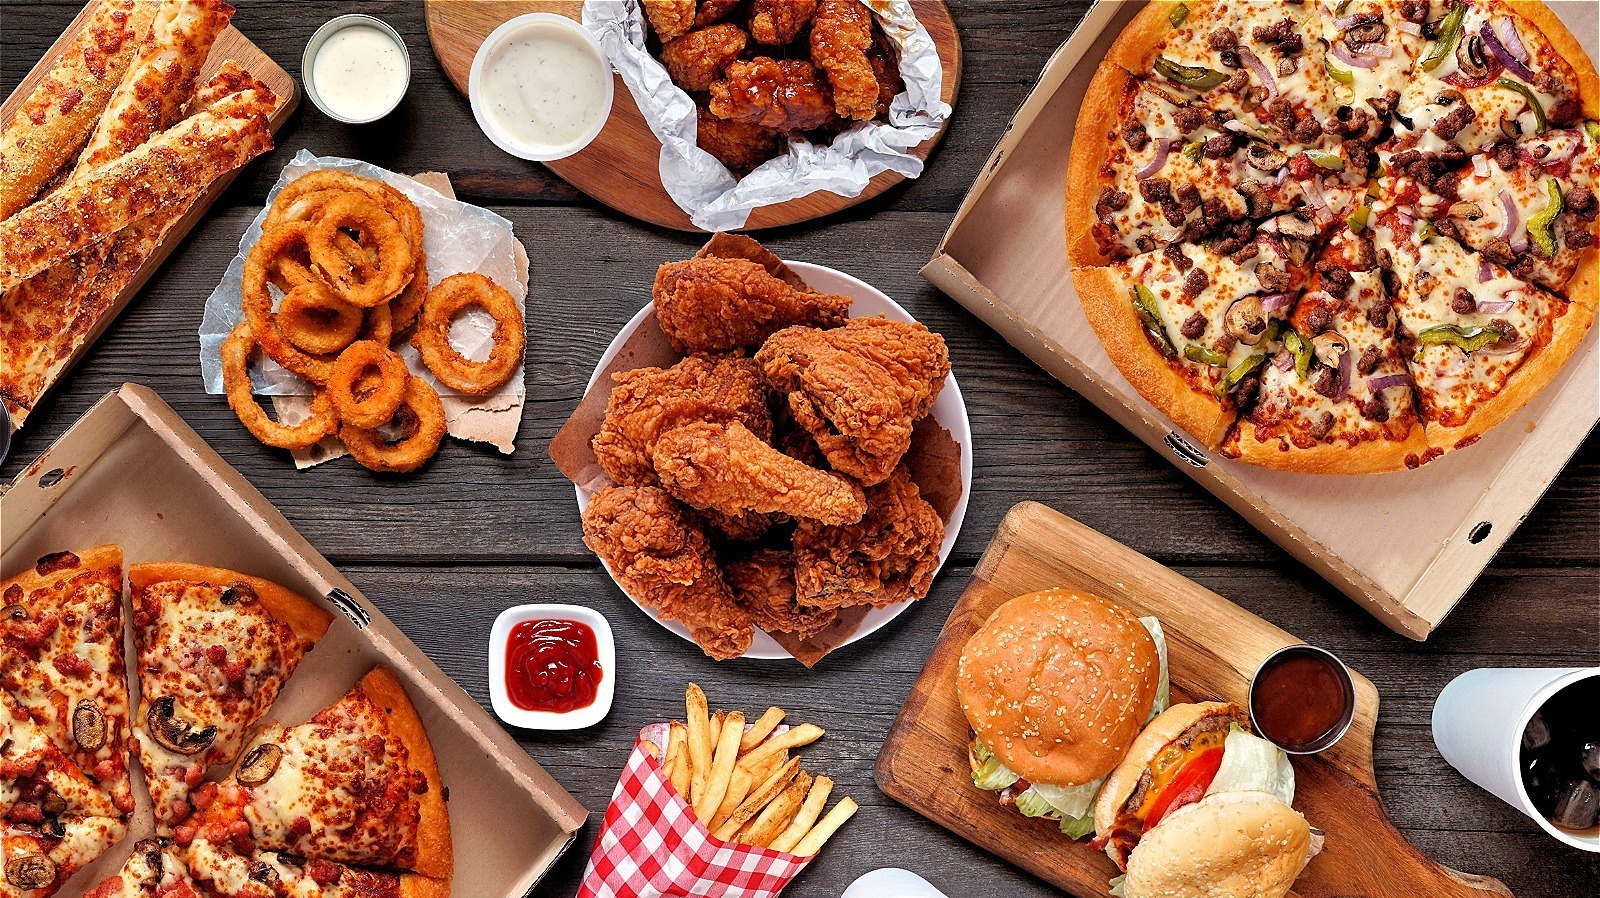 National Fast Food Day 2021 Where To Get The Best Food Freebies And Deals